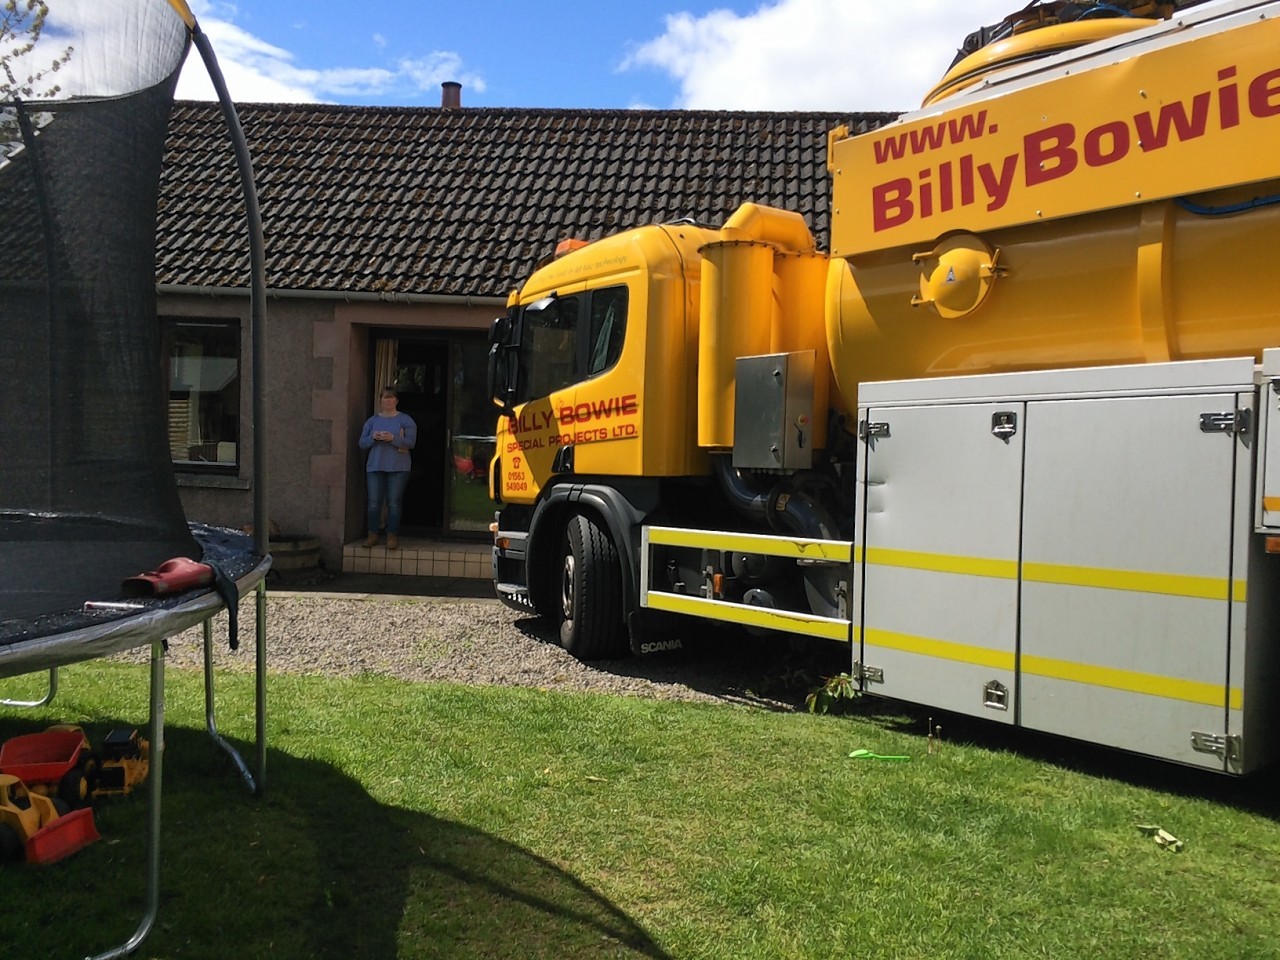 The lorry crashed into the house at Tore in the Black Isle